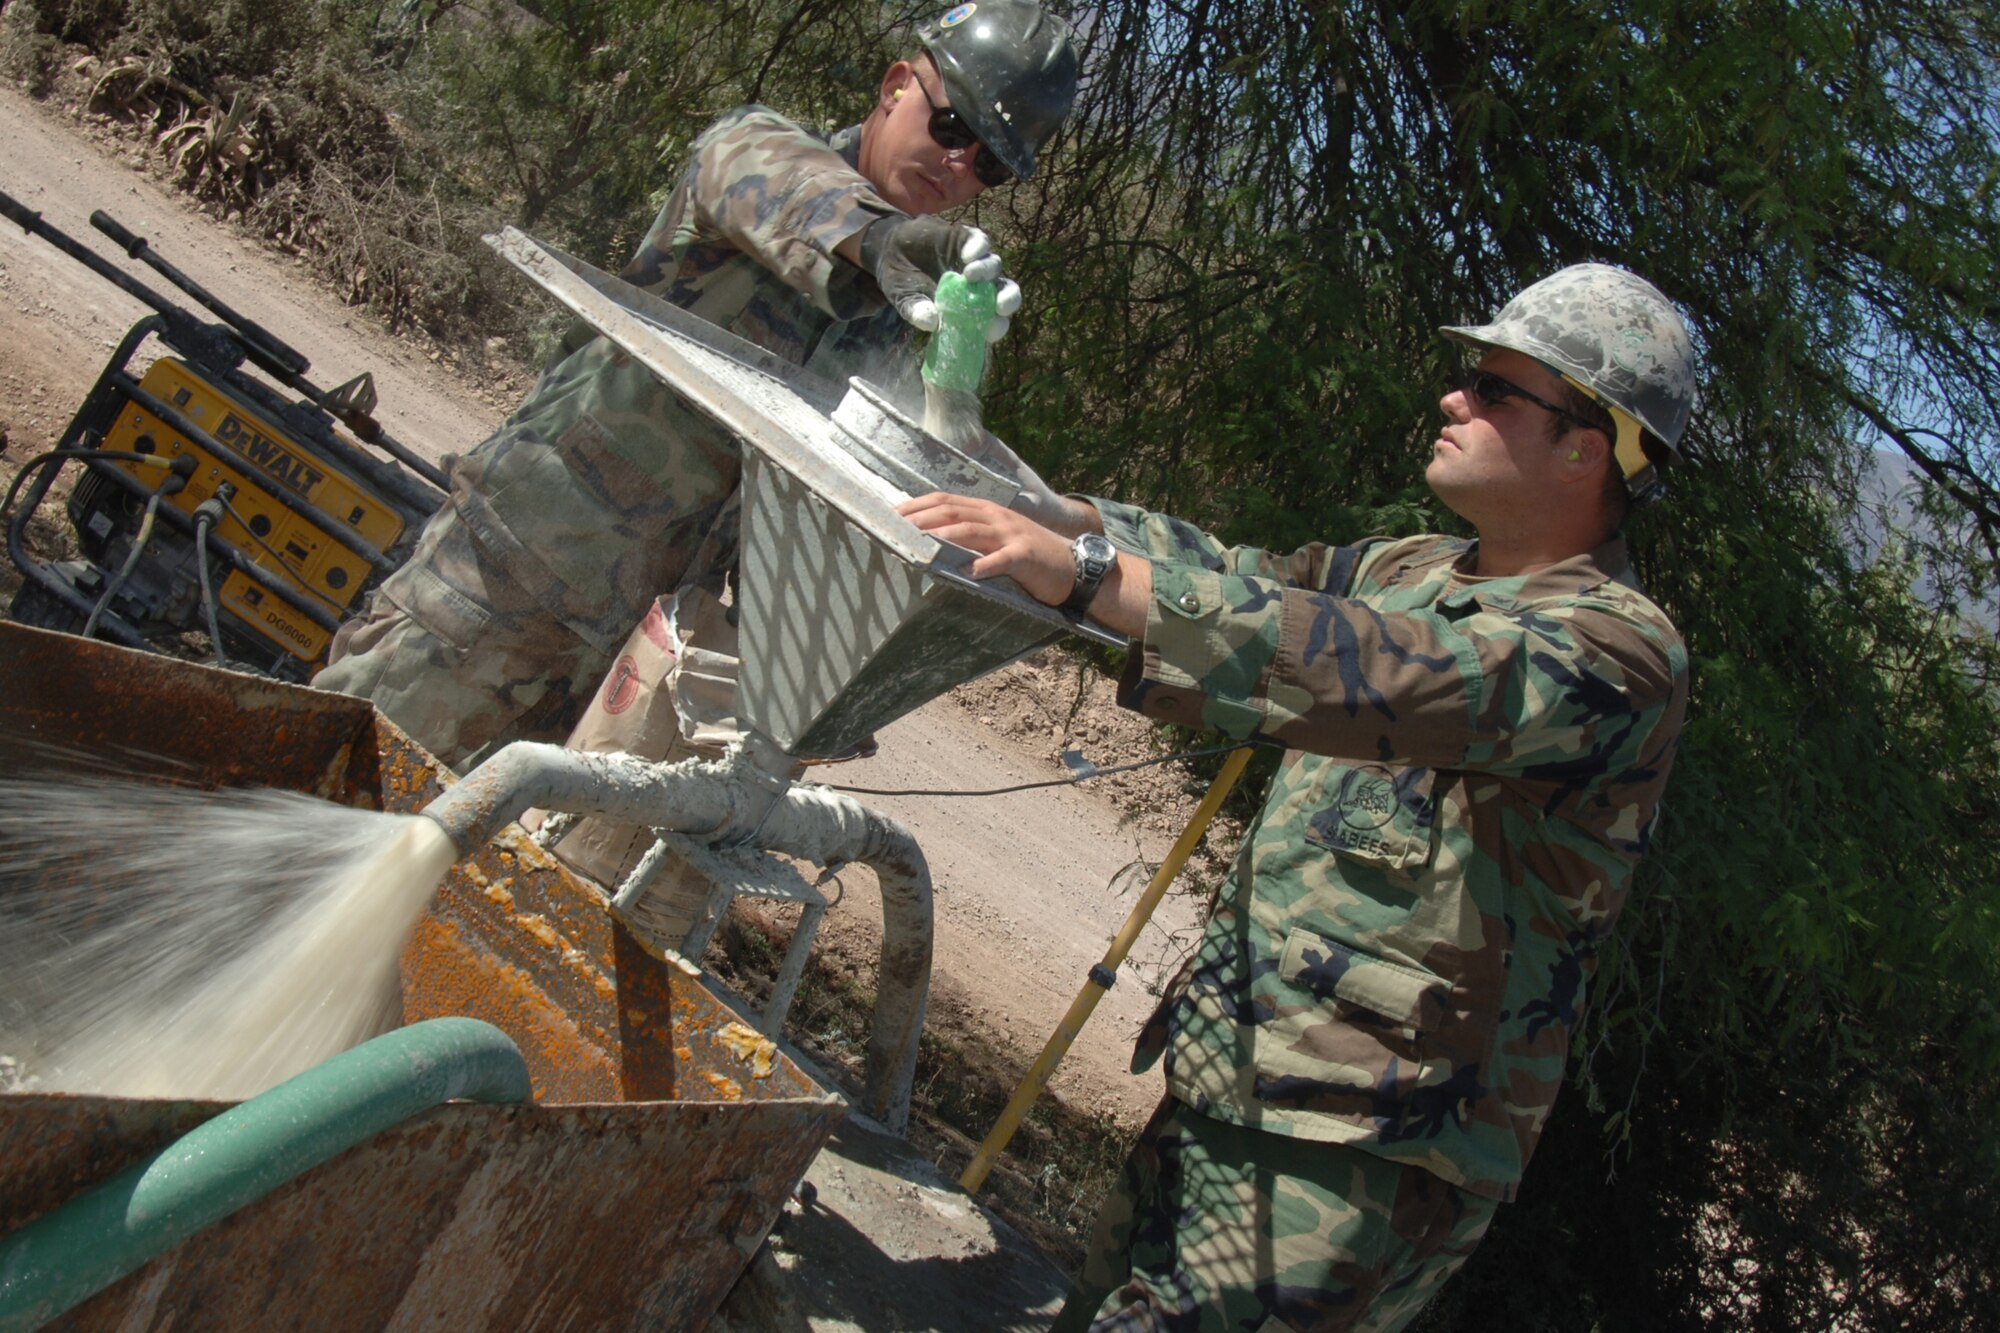 U.S. Navy Petty Officer 2nd Class Brad Tom and U.S. Navy Petty Officer 3rd Class Chad Riechmann, mechanics assigned to Task Force New Horizons, mix material that adds viscosity to a water well drill, June 19, in Huanta, Peru  where U.S. Seabeas are constructing a water well in support of New Horizons Peru-2008, a U.S. and Peruvian humanitarian mission set on providing relief to underprivileged Peruvians. (U.S. Air Force photo/Tech. Sgt. Kerry Jackson)